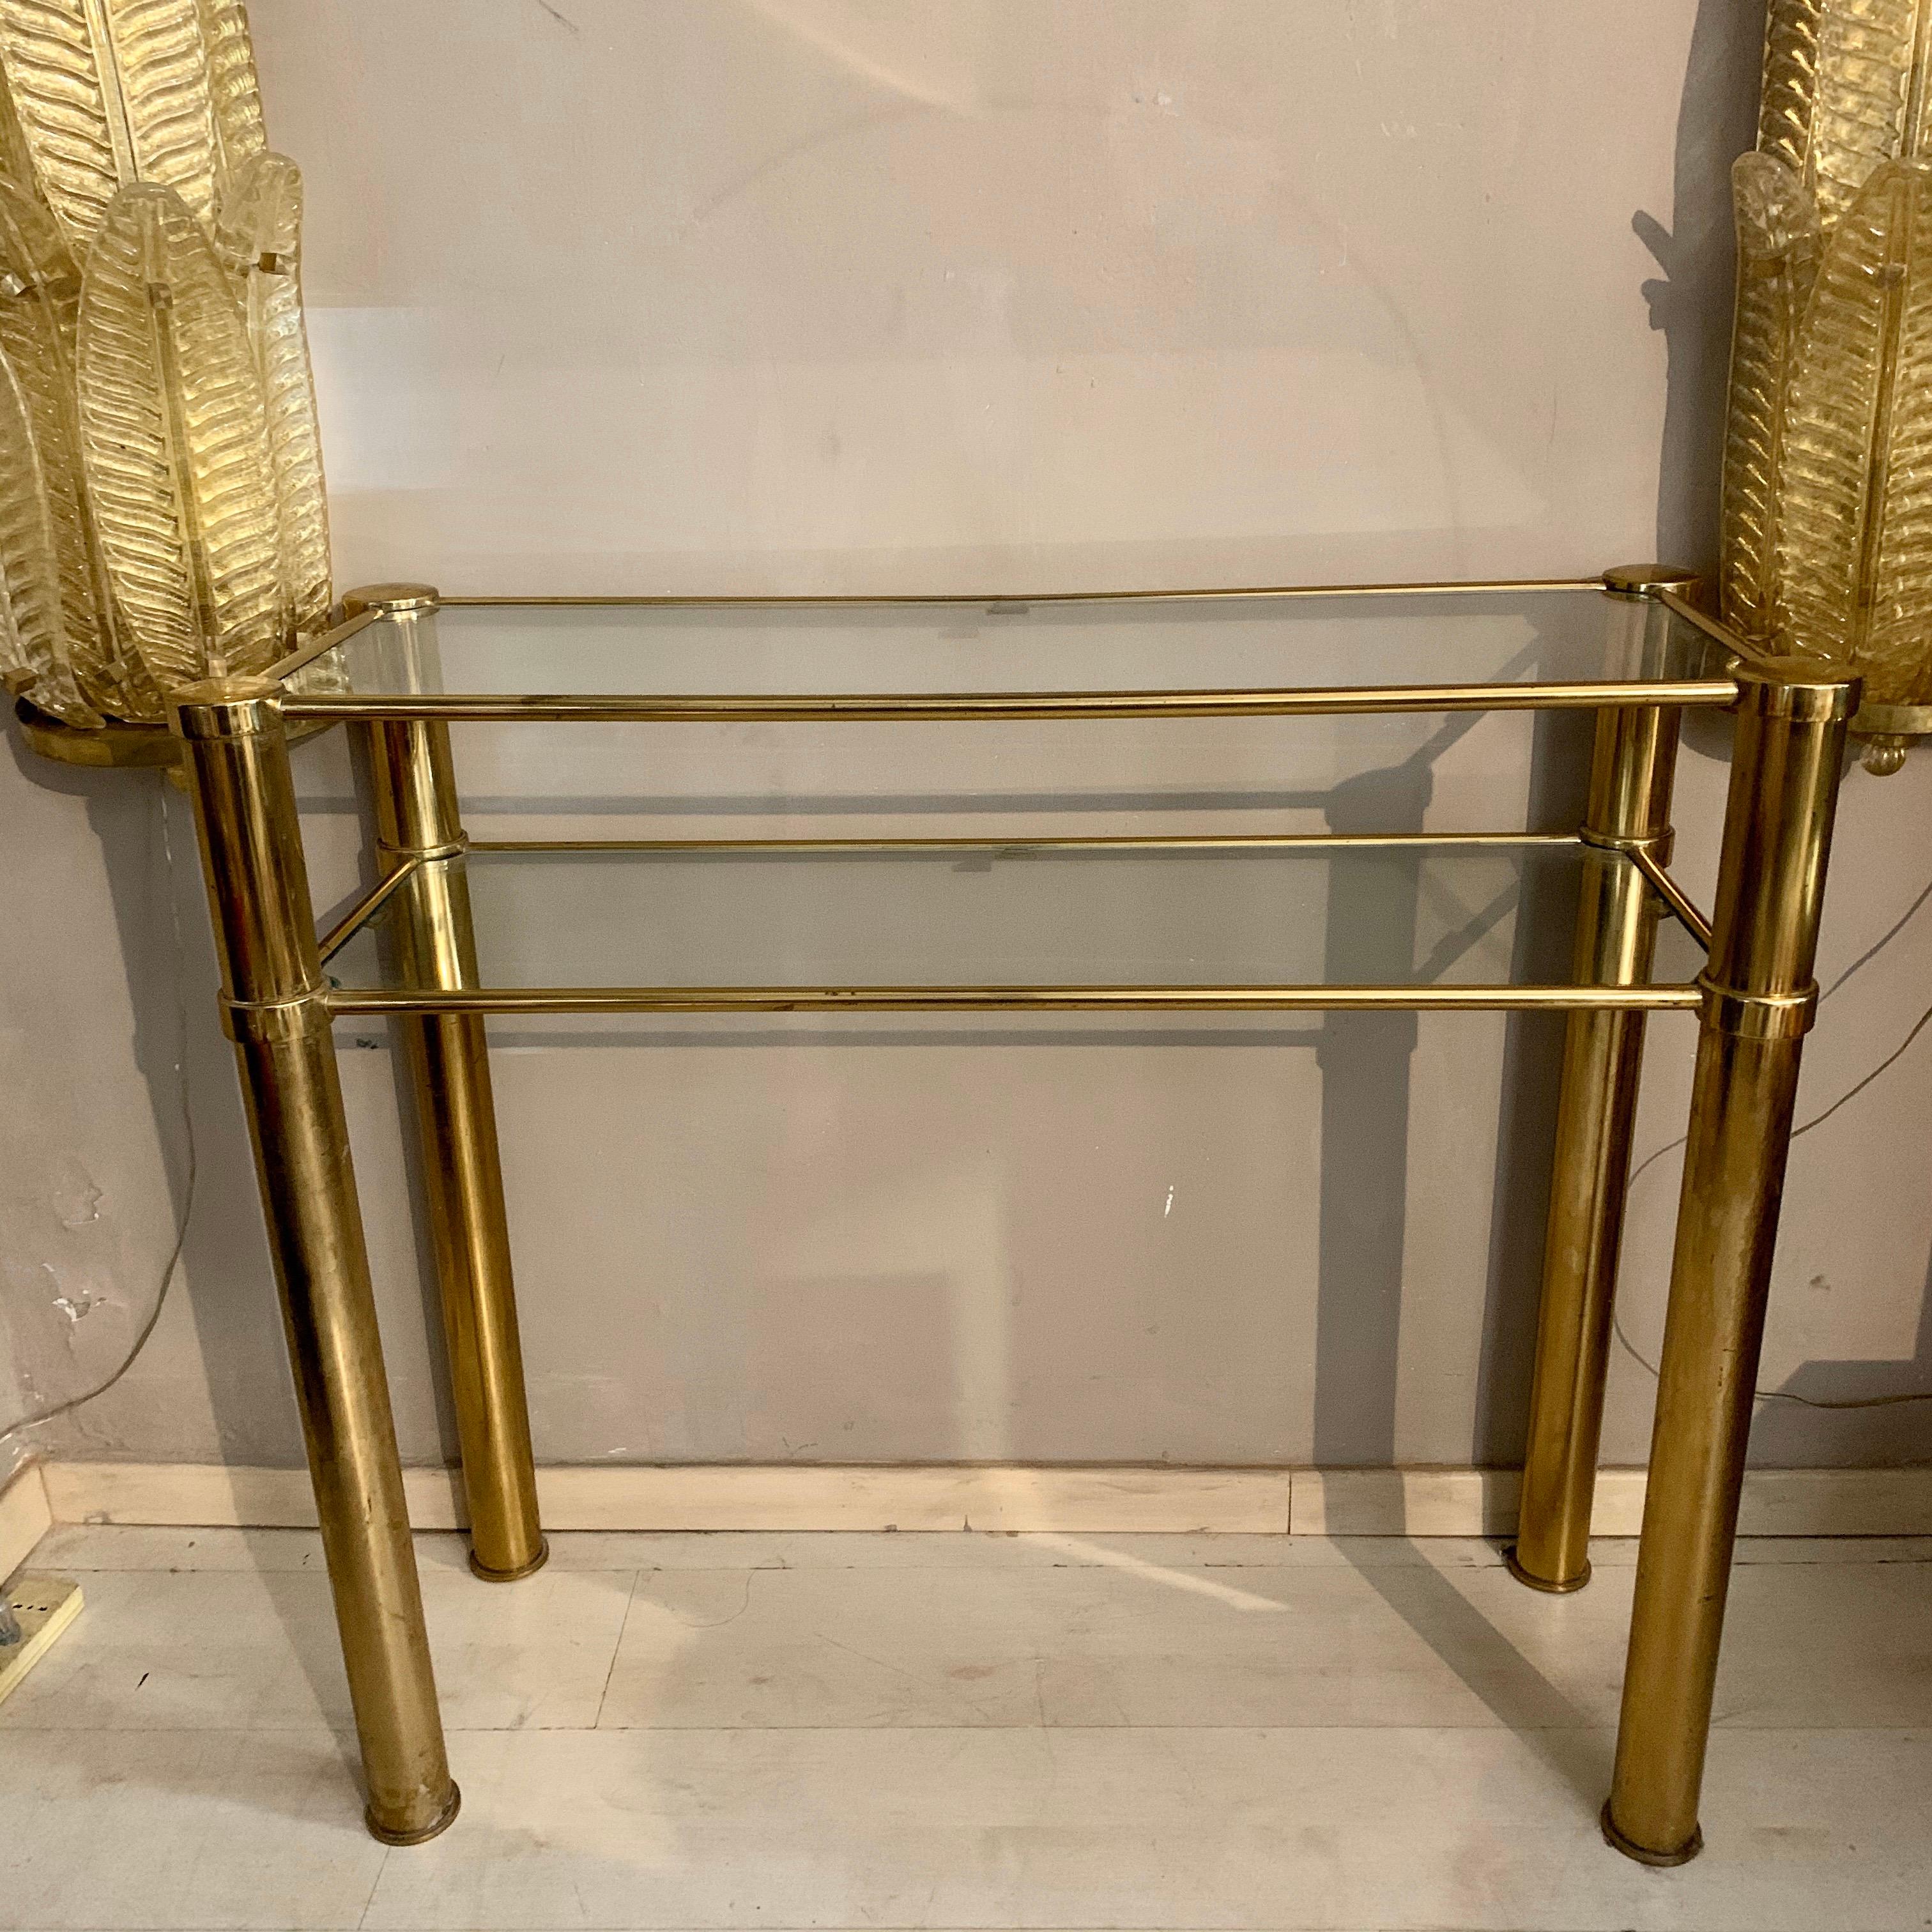 Italian brass console with double crystal shelves. The brass has its original patina.
Good vintage condition.